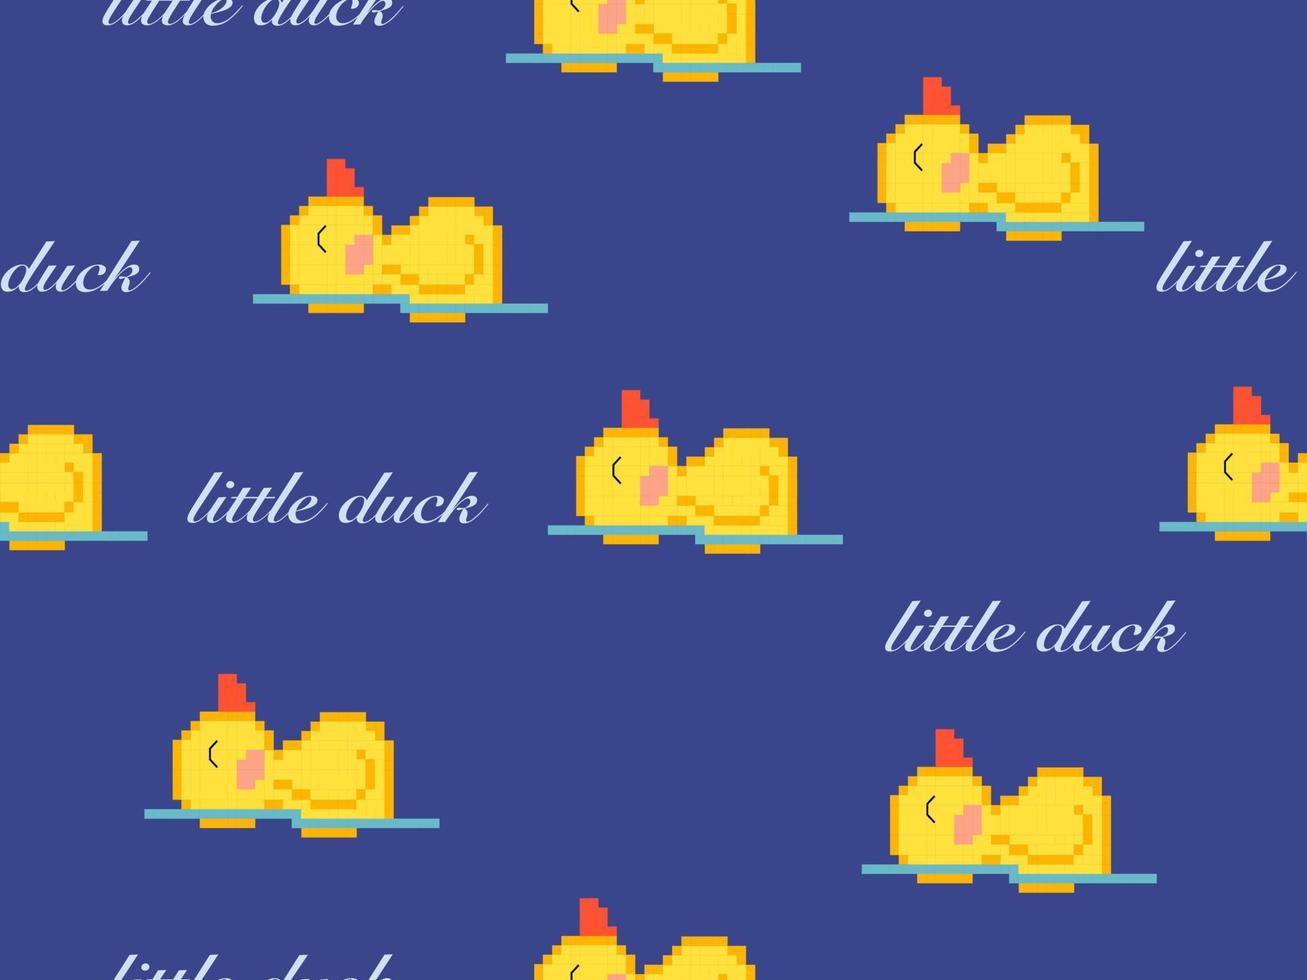 Duck cartoon character seamless pattern on blue background.Pixel style vector